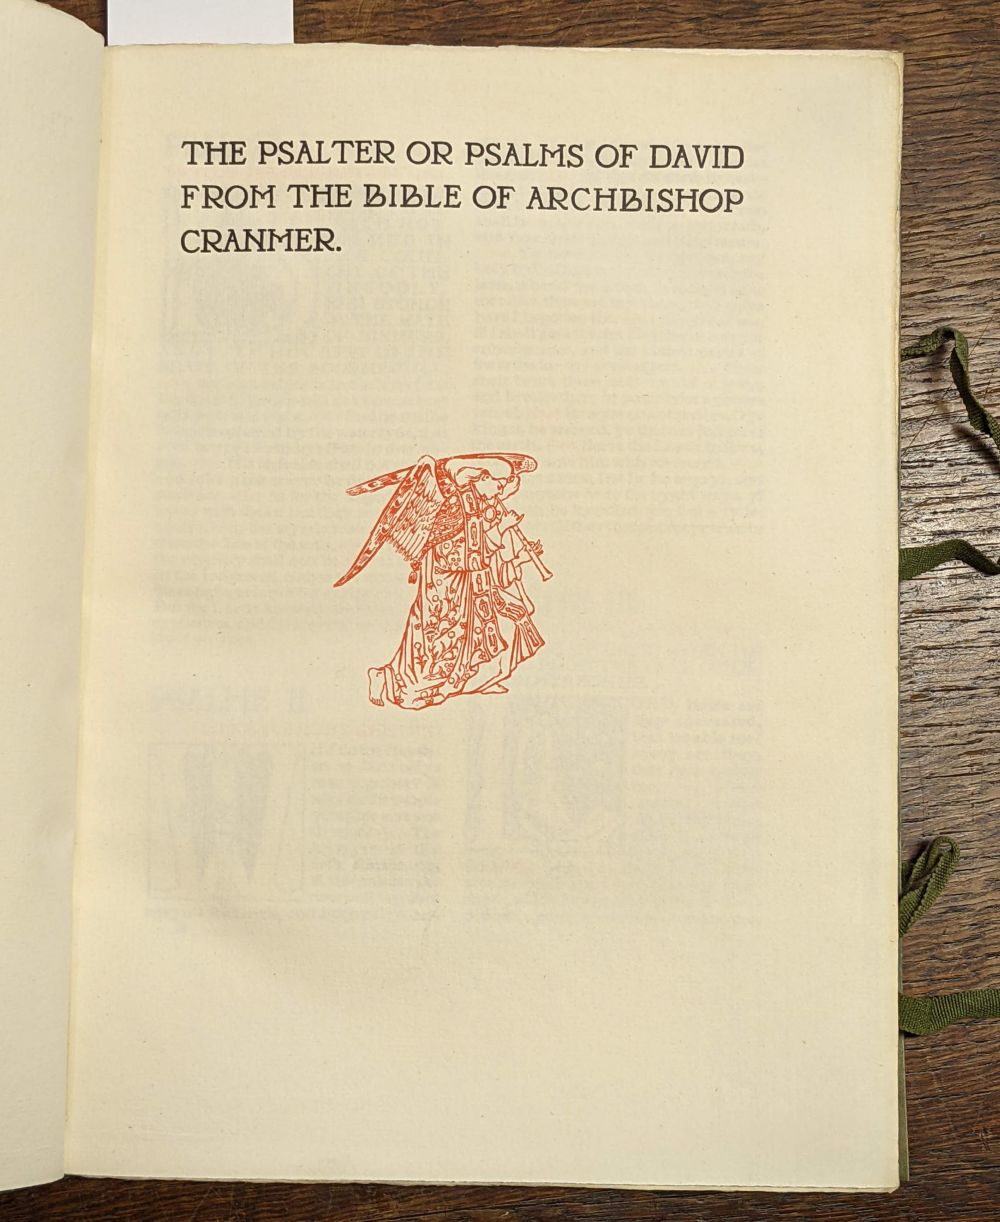 Essex House Press. The Psalter or Psalms of David, 1902 - Image 4 of 5